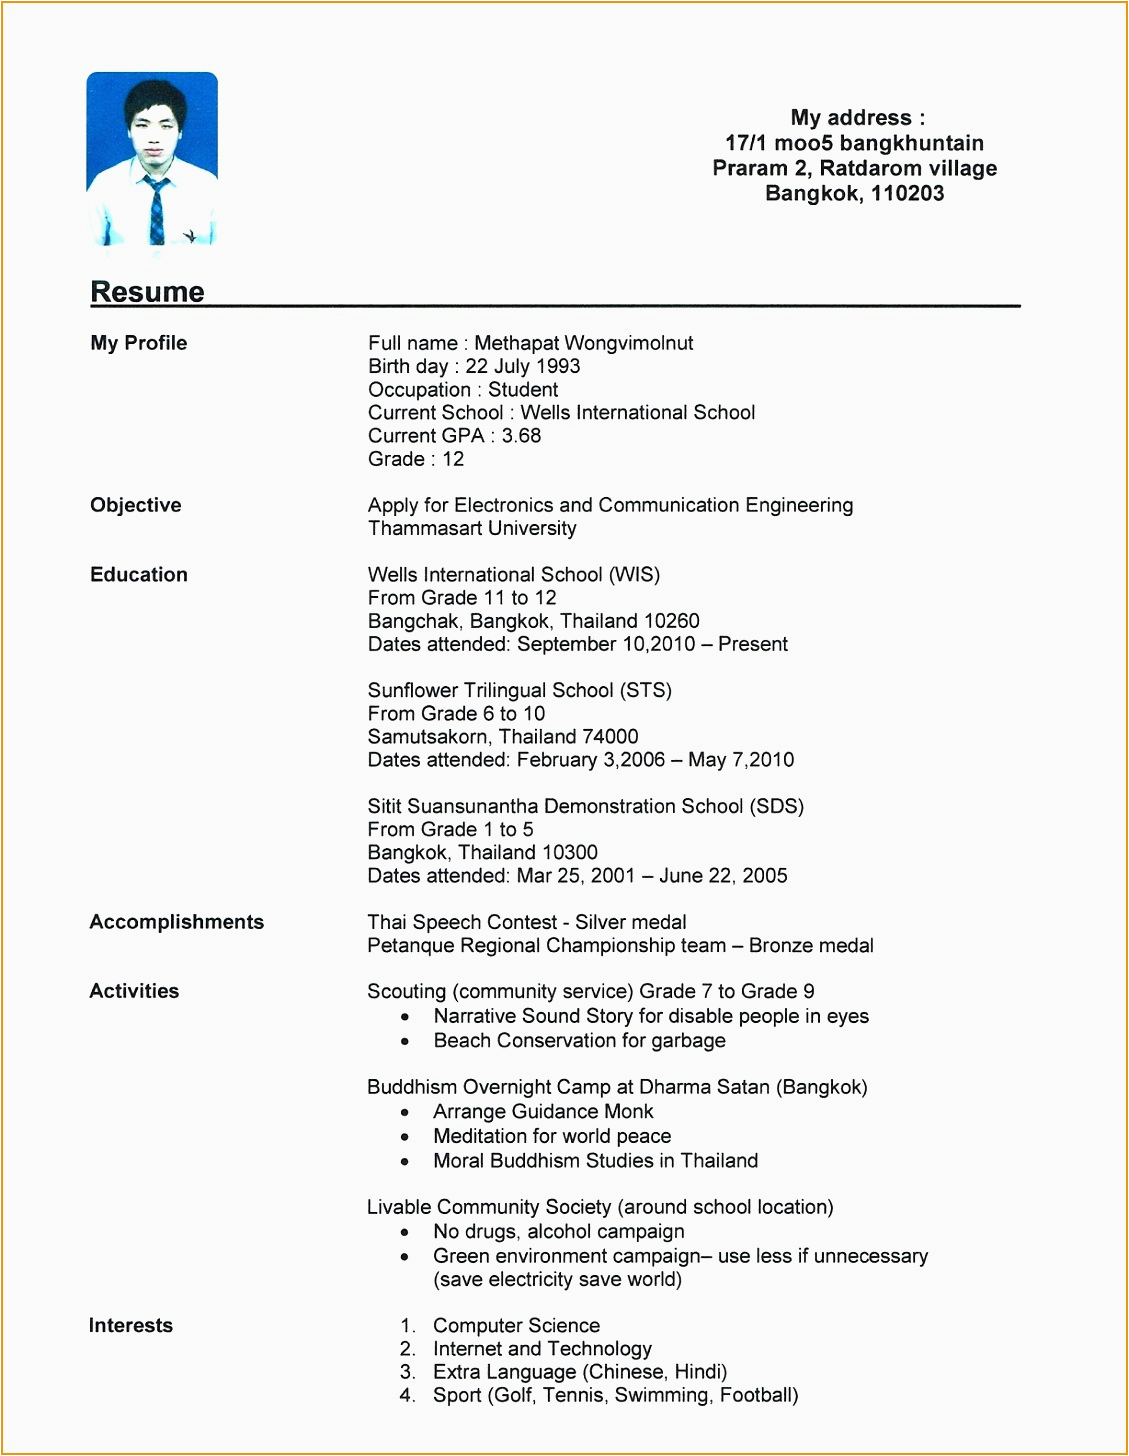 Sample Resume for Undergraduate Student with No Experience 6 Resume Templates College Student No Job Experience